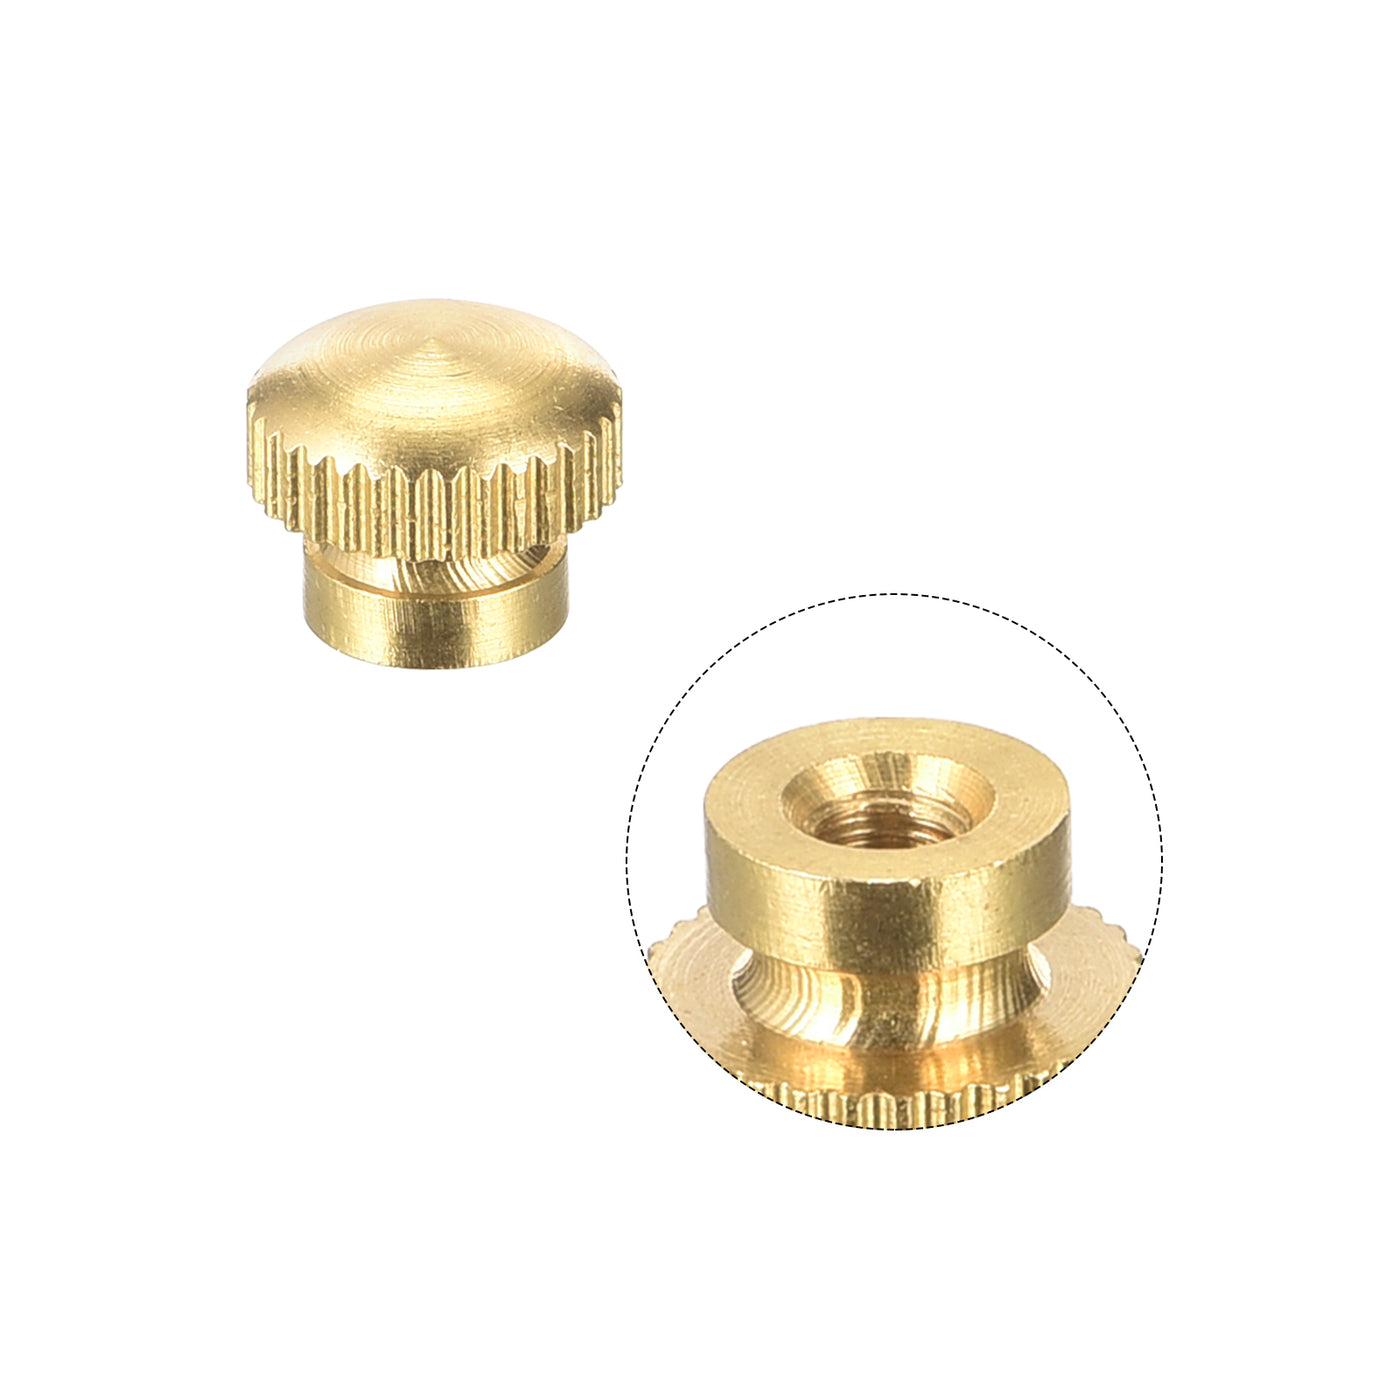 uxcell Uxcell Brass Knurled Thumb Nuts, M3x0.5mm Round Stepped Knobs Fasteners for 3D Printer, Electronic Equipment 4Pcs